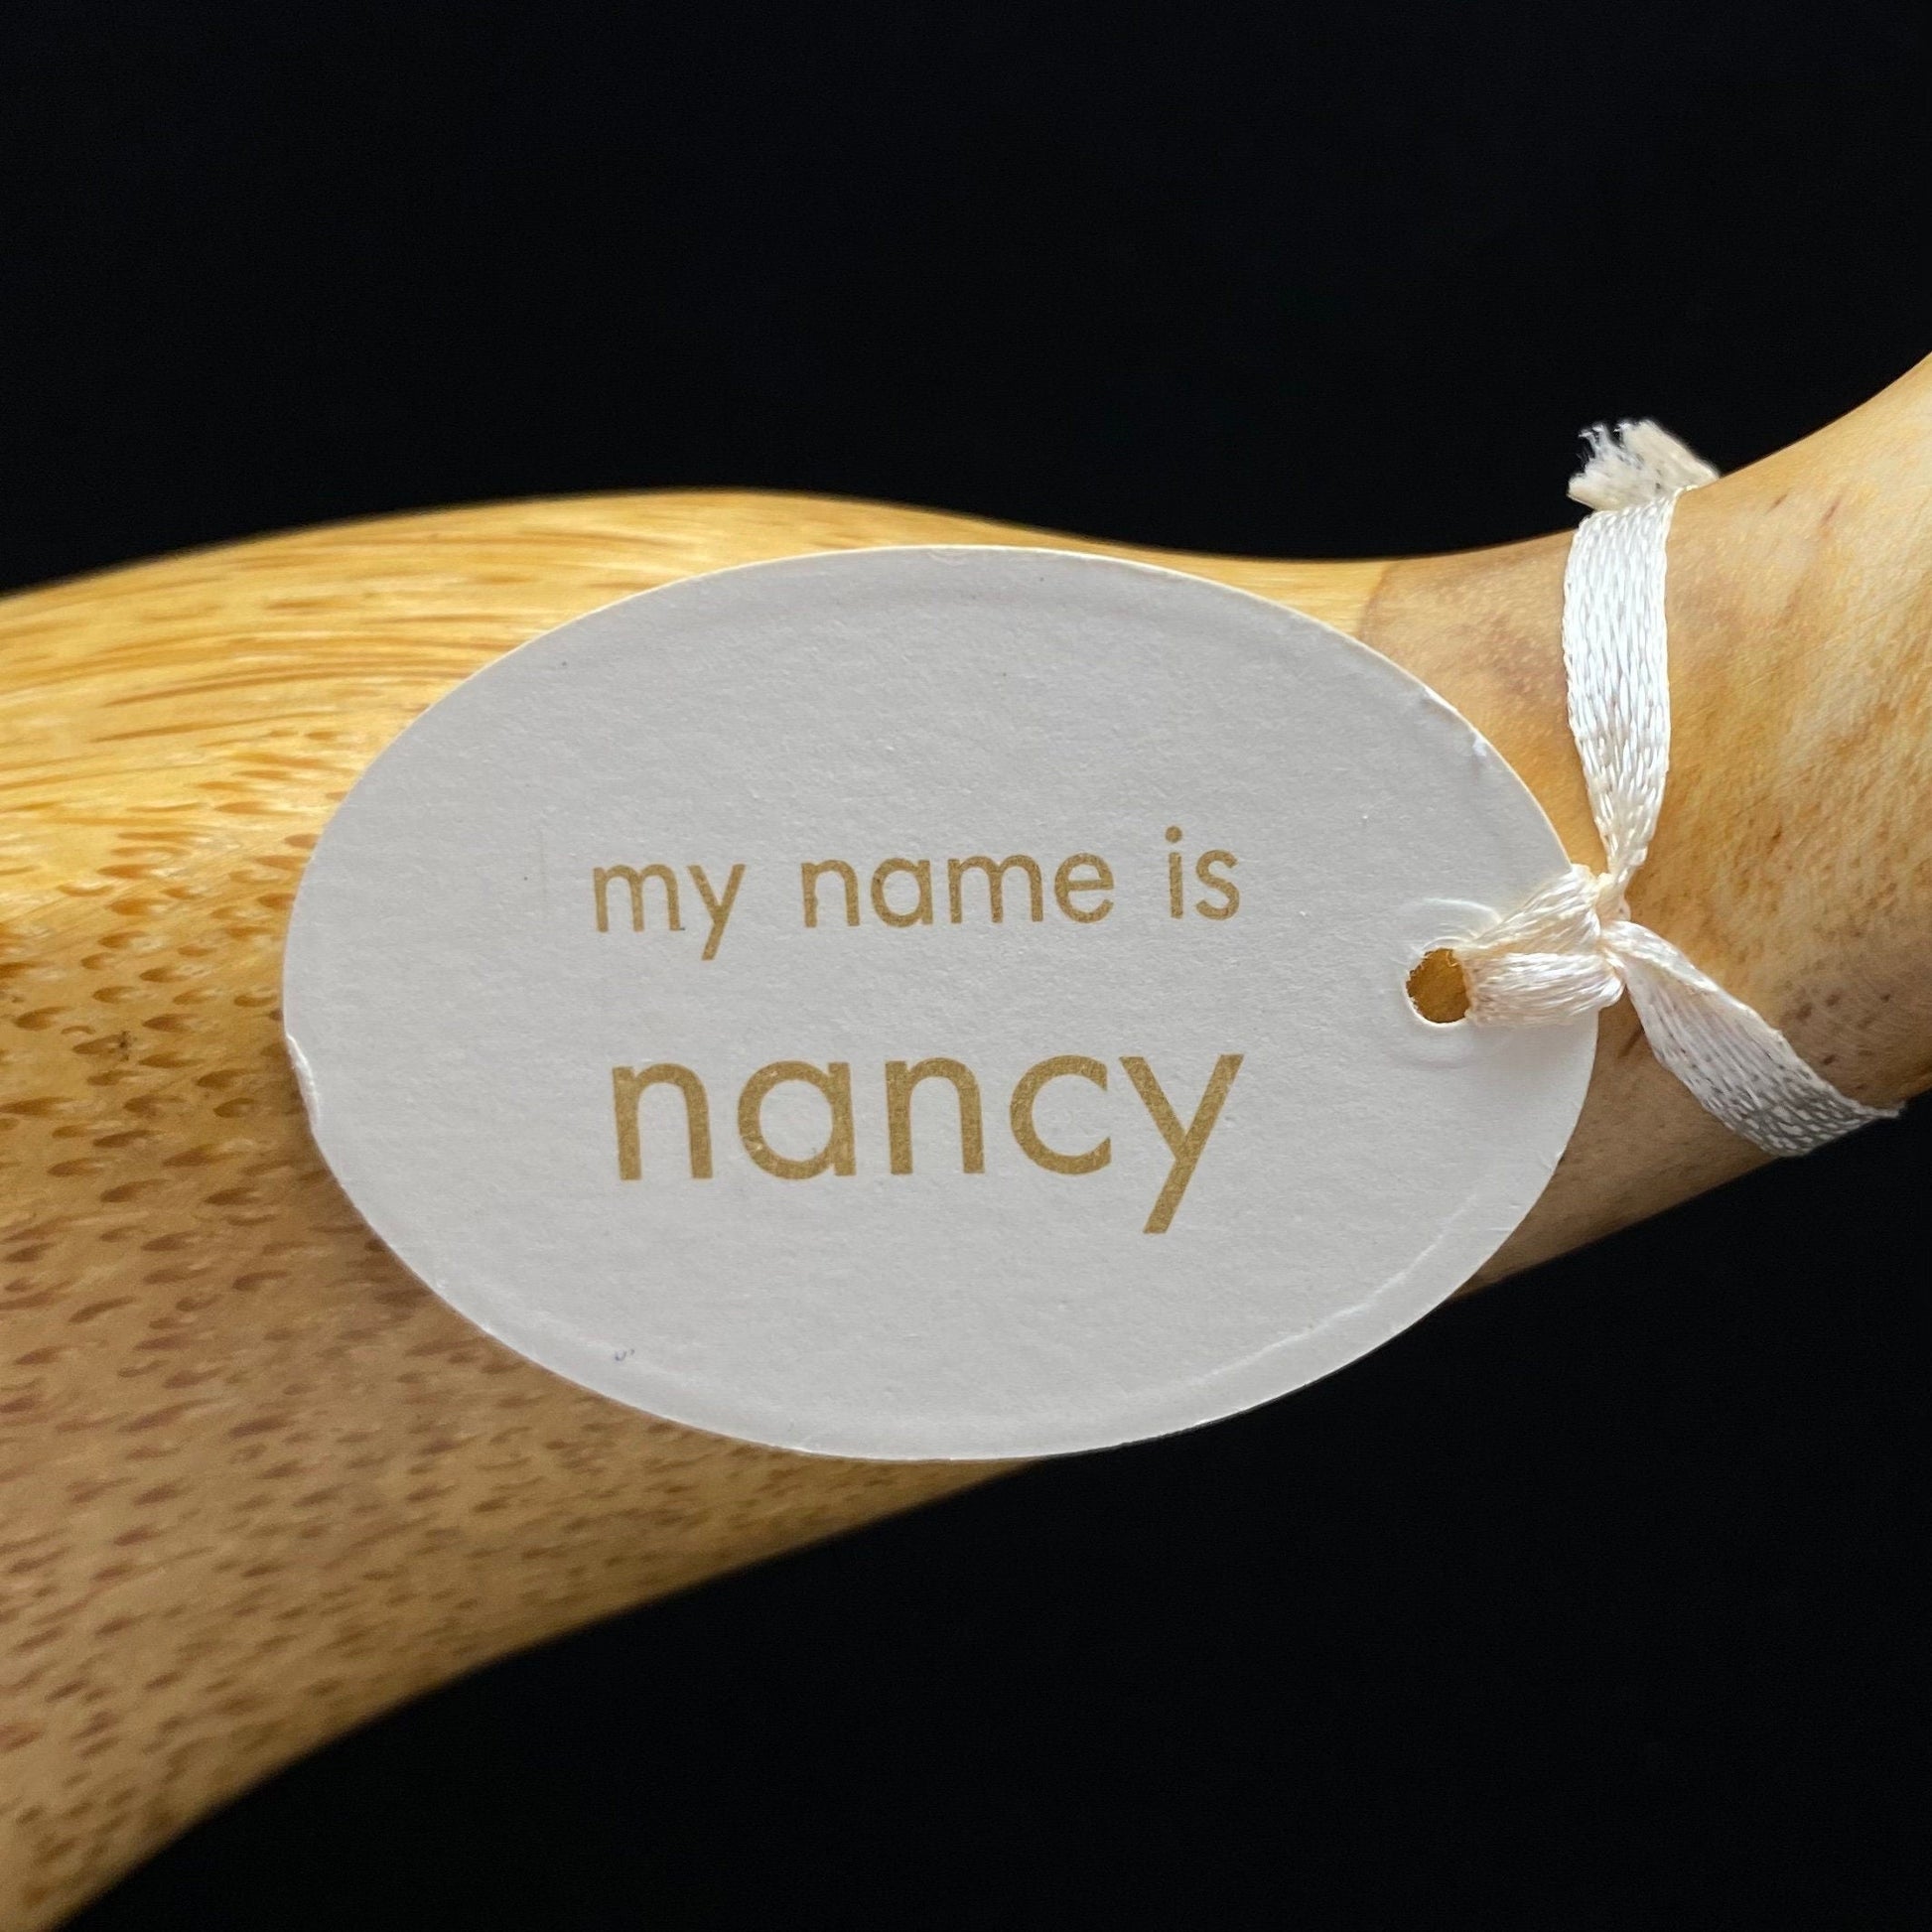 Nancy - Hand-carved and Hand-painted Bamboo Duck